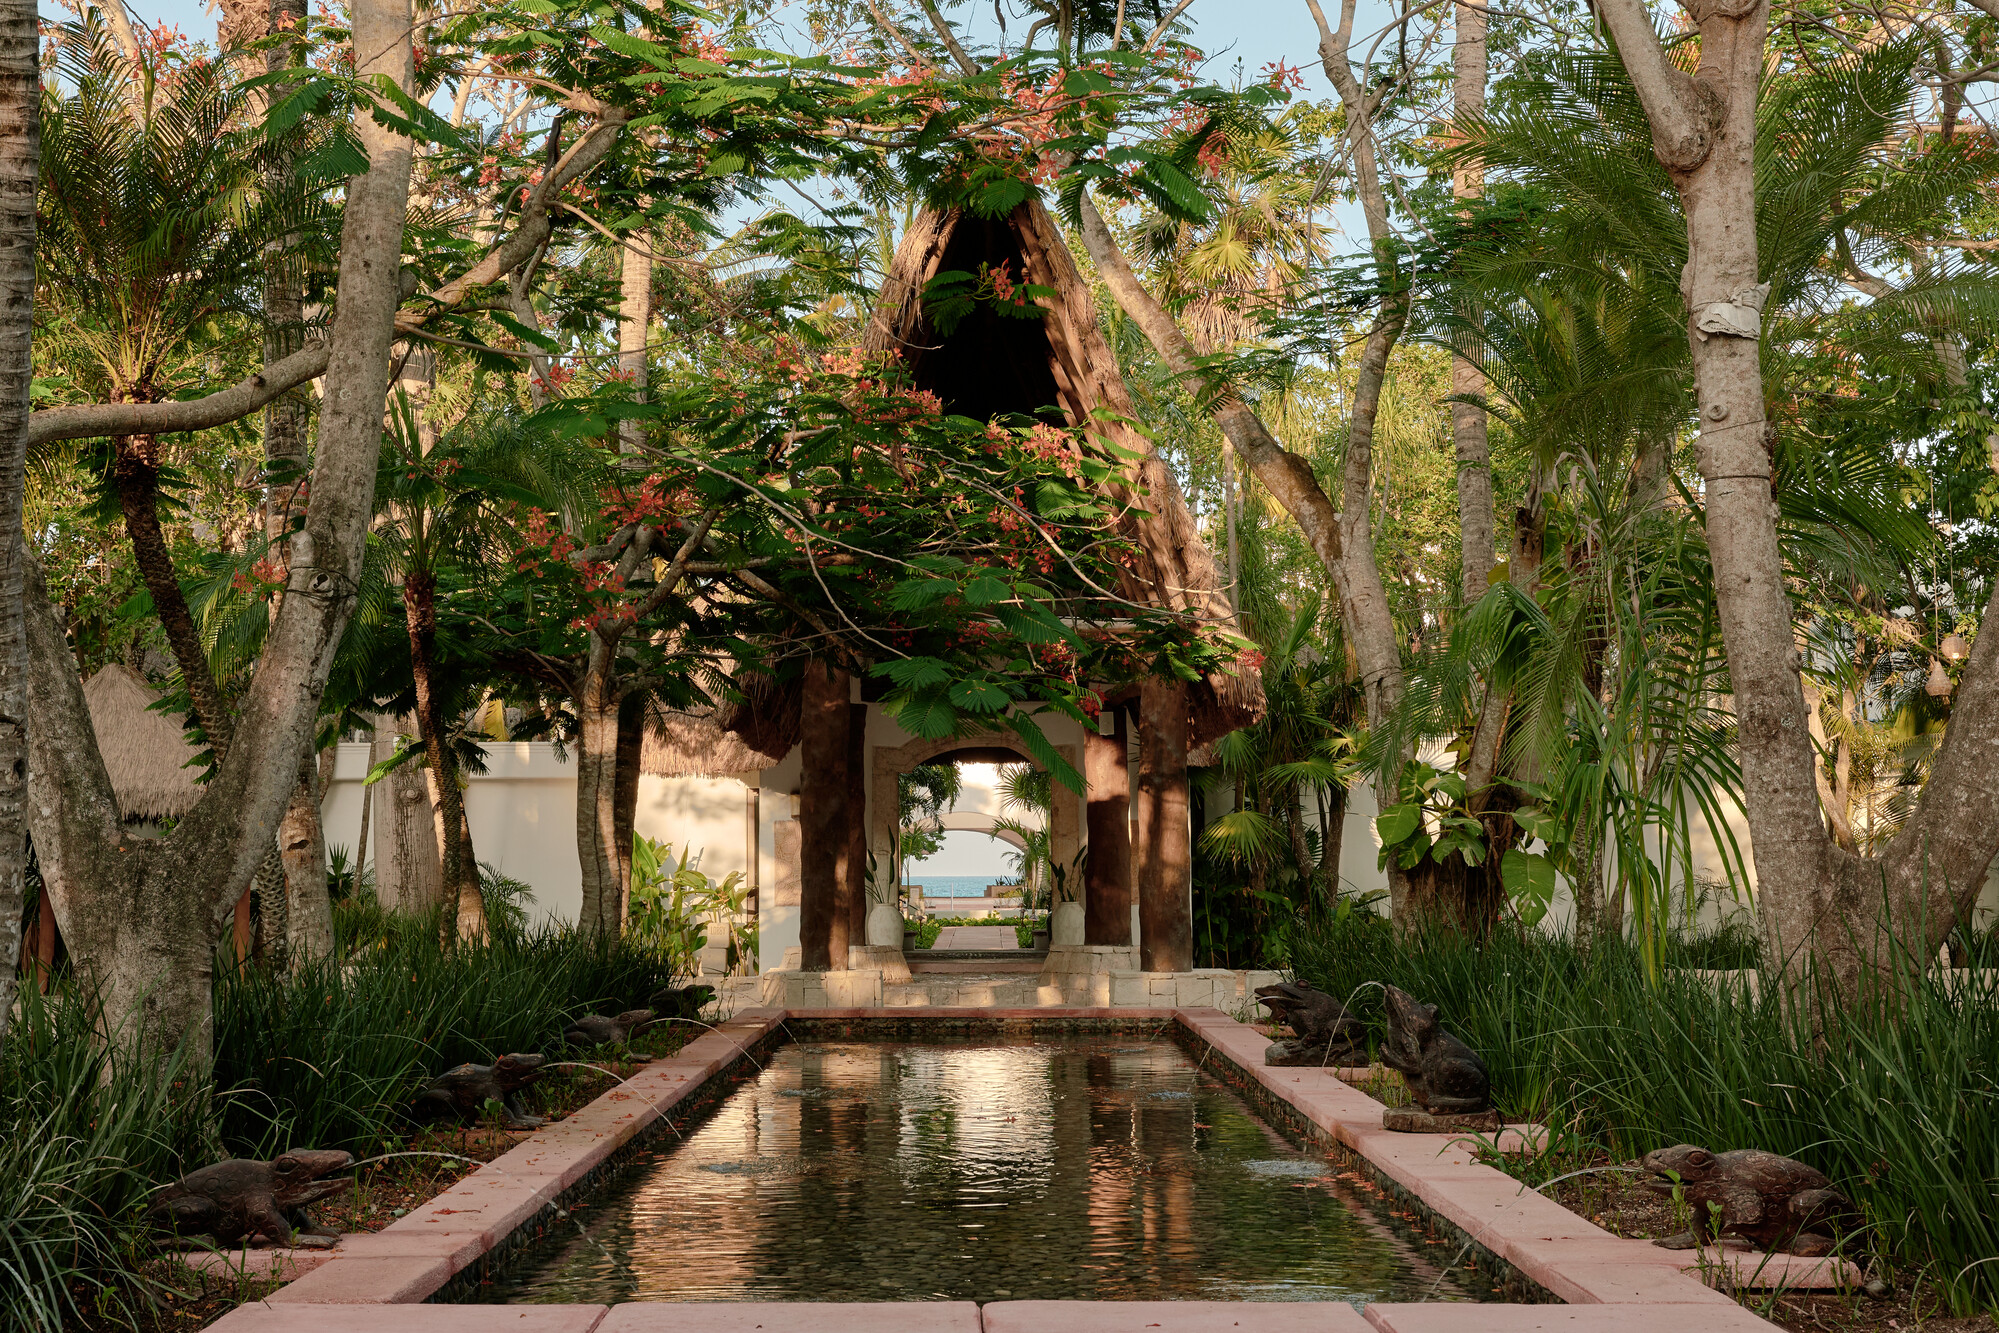 MAROMA SPA BY GUERLAIN OPENS: THE MAISON’S FIRST SPA IN LATIN AMERICA